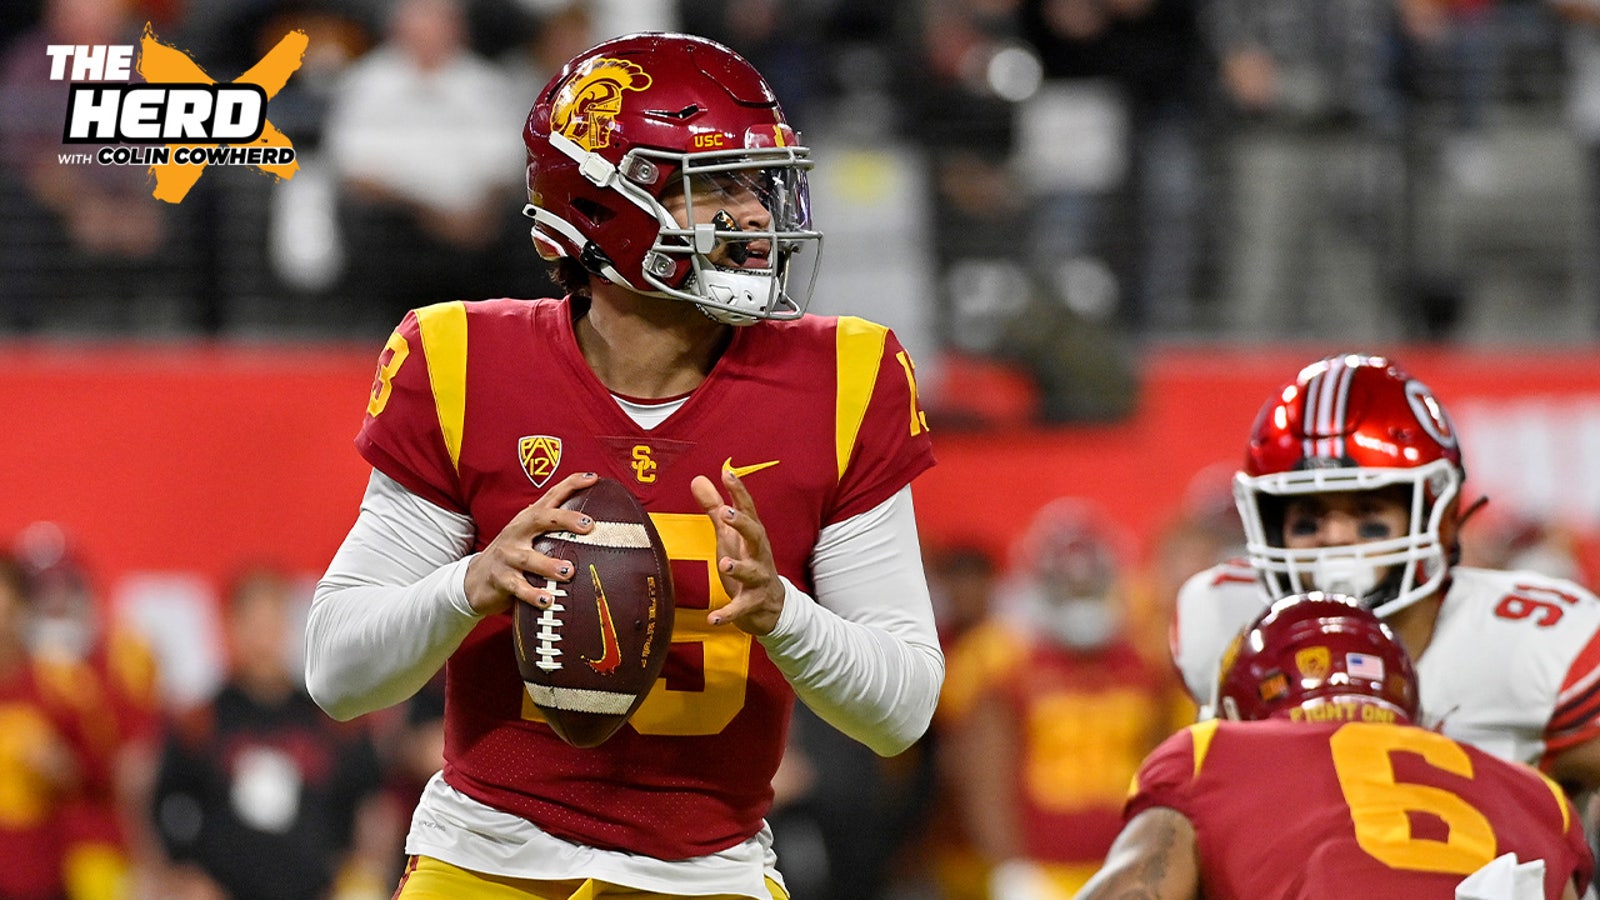 Can Lincoln Riley, Caleb Williams lead USC to its first-ever CFP appearance?